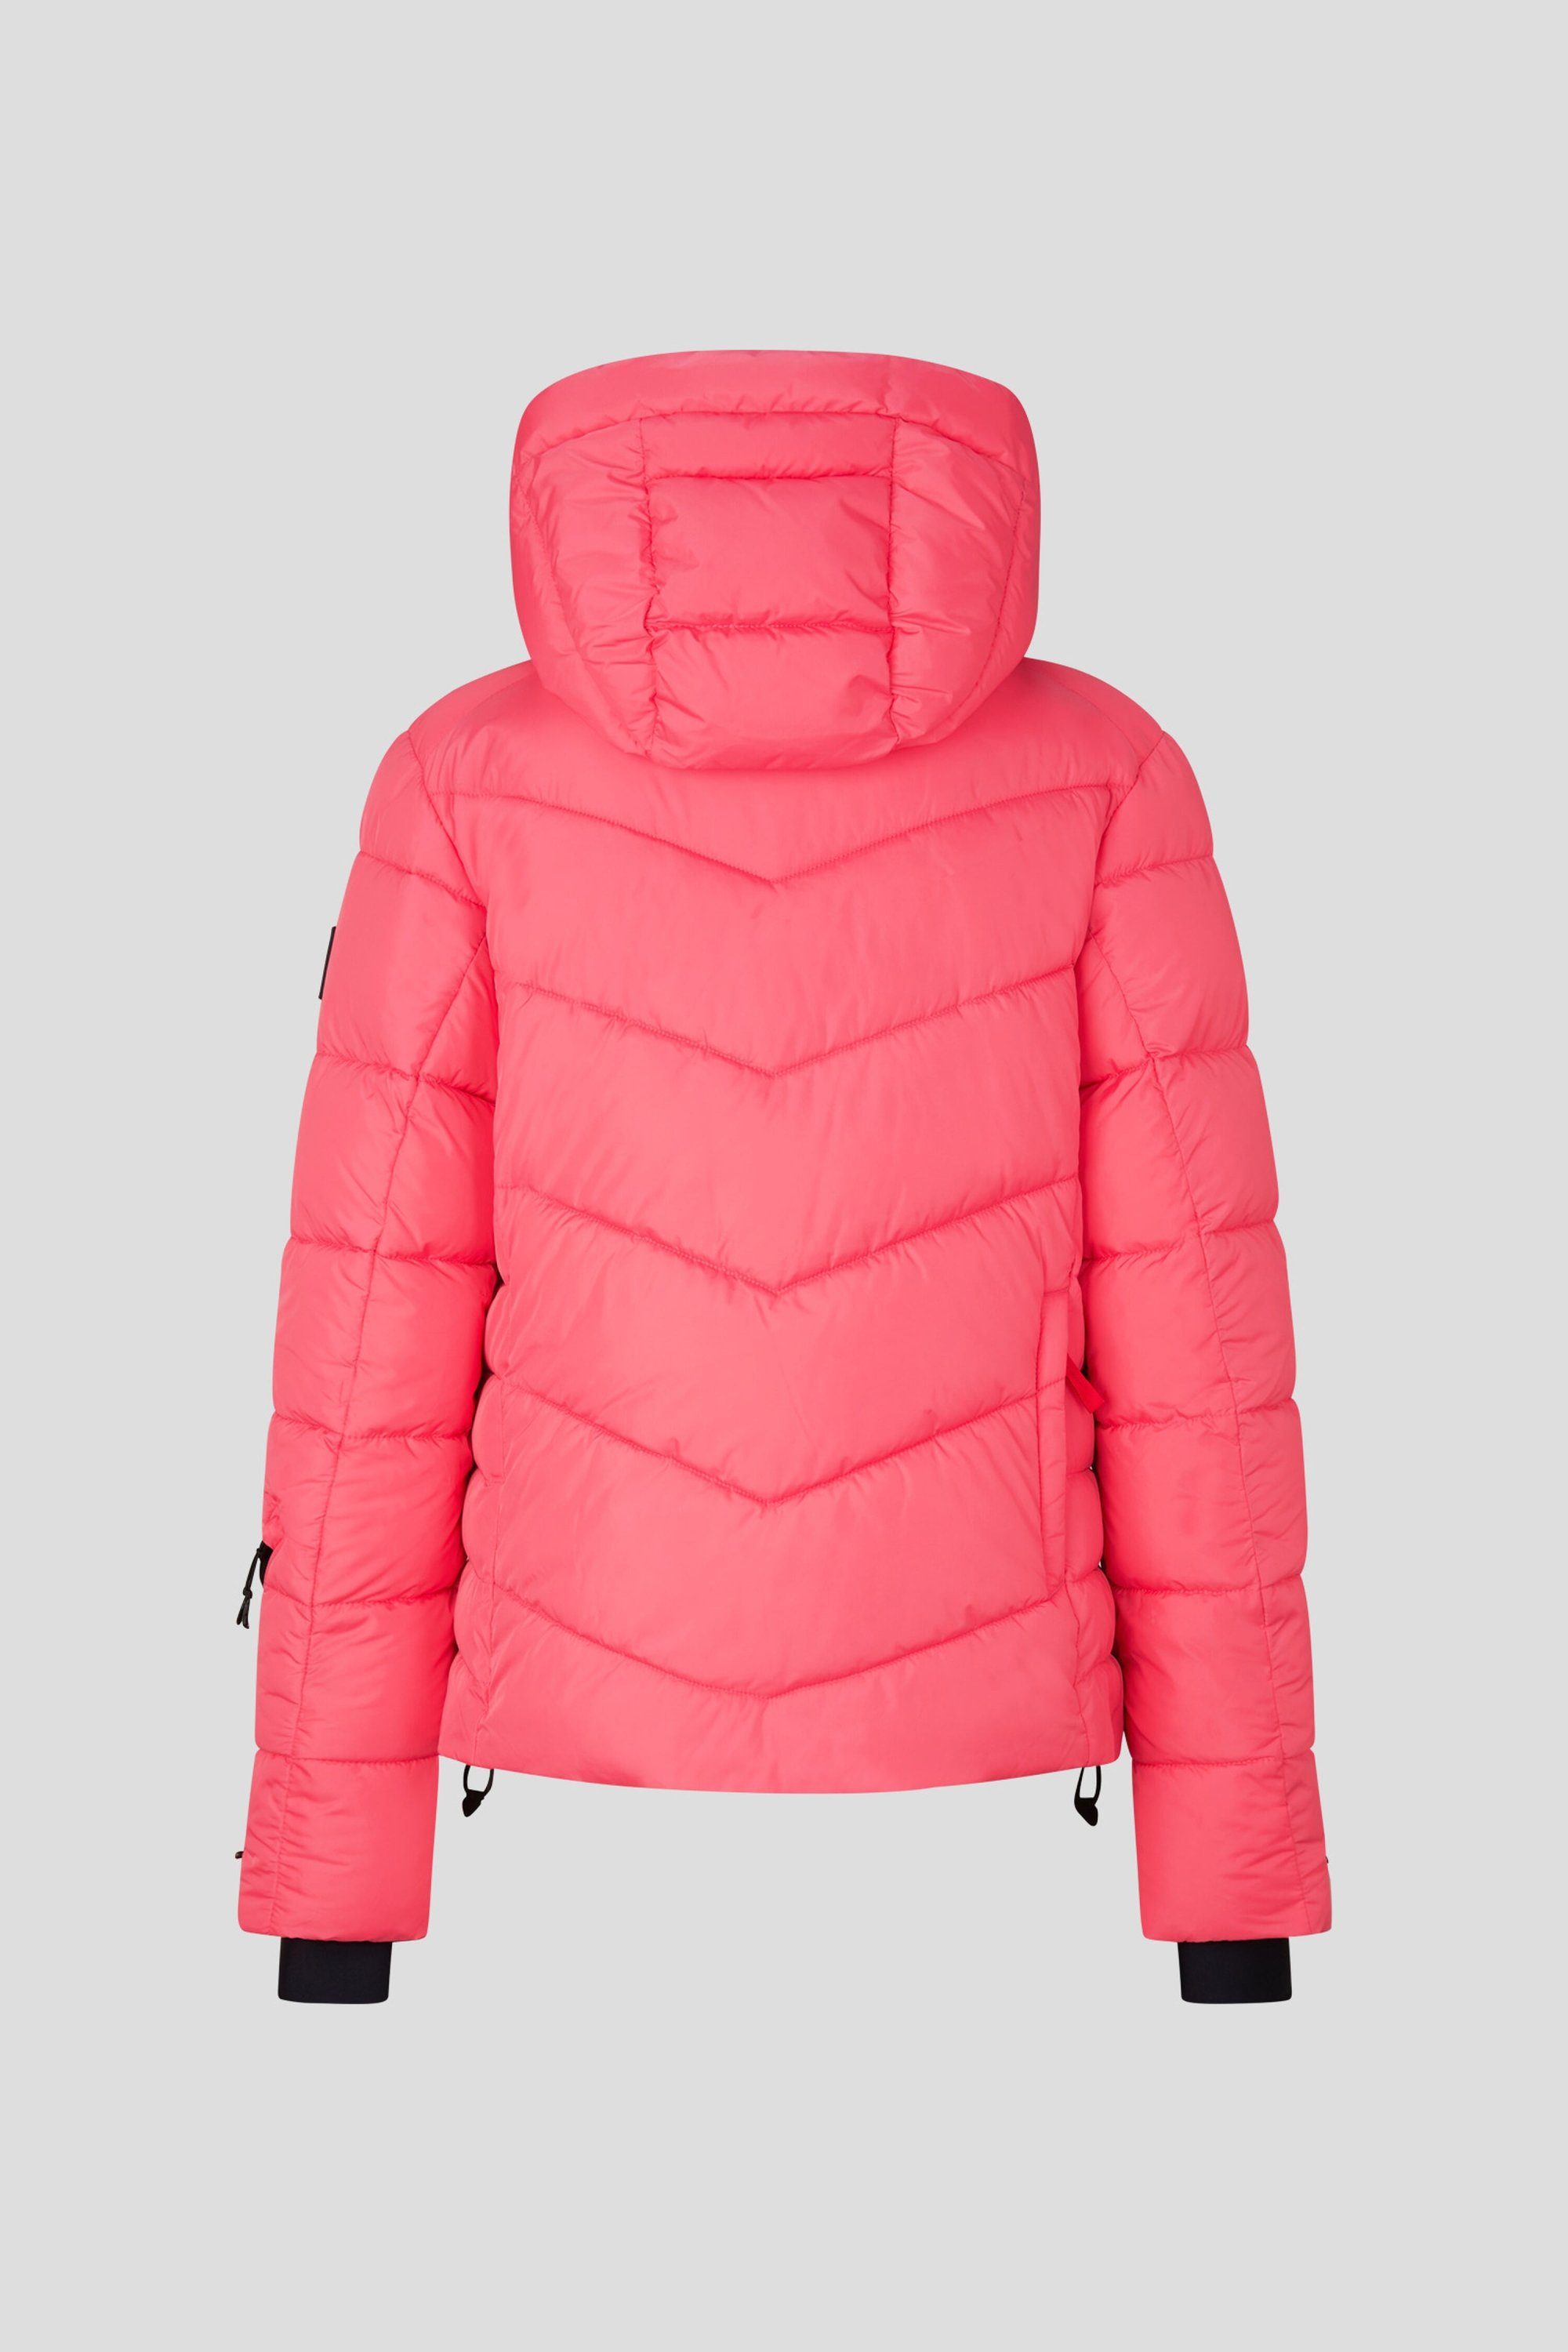 coral Ice pink SAELLY2 Fire Bogner + Kapuzensweatjacke